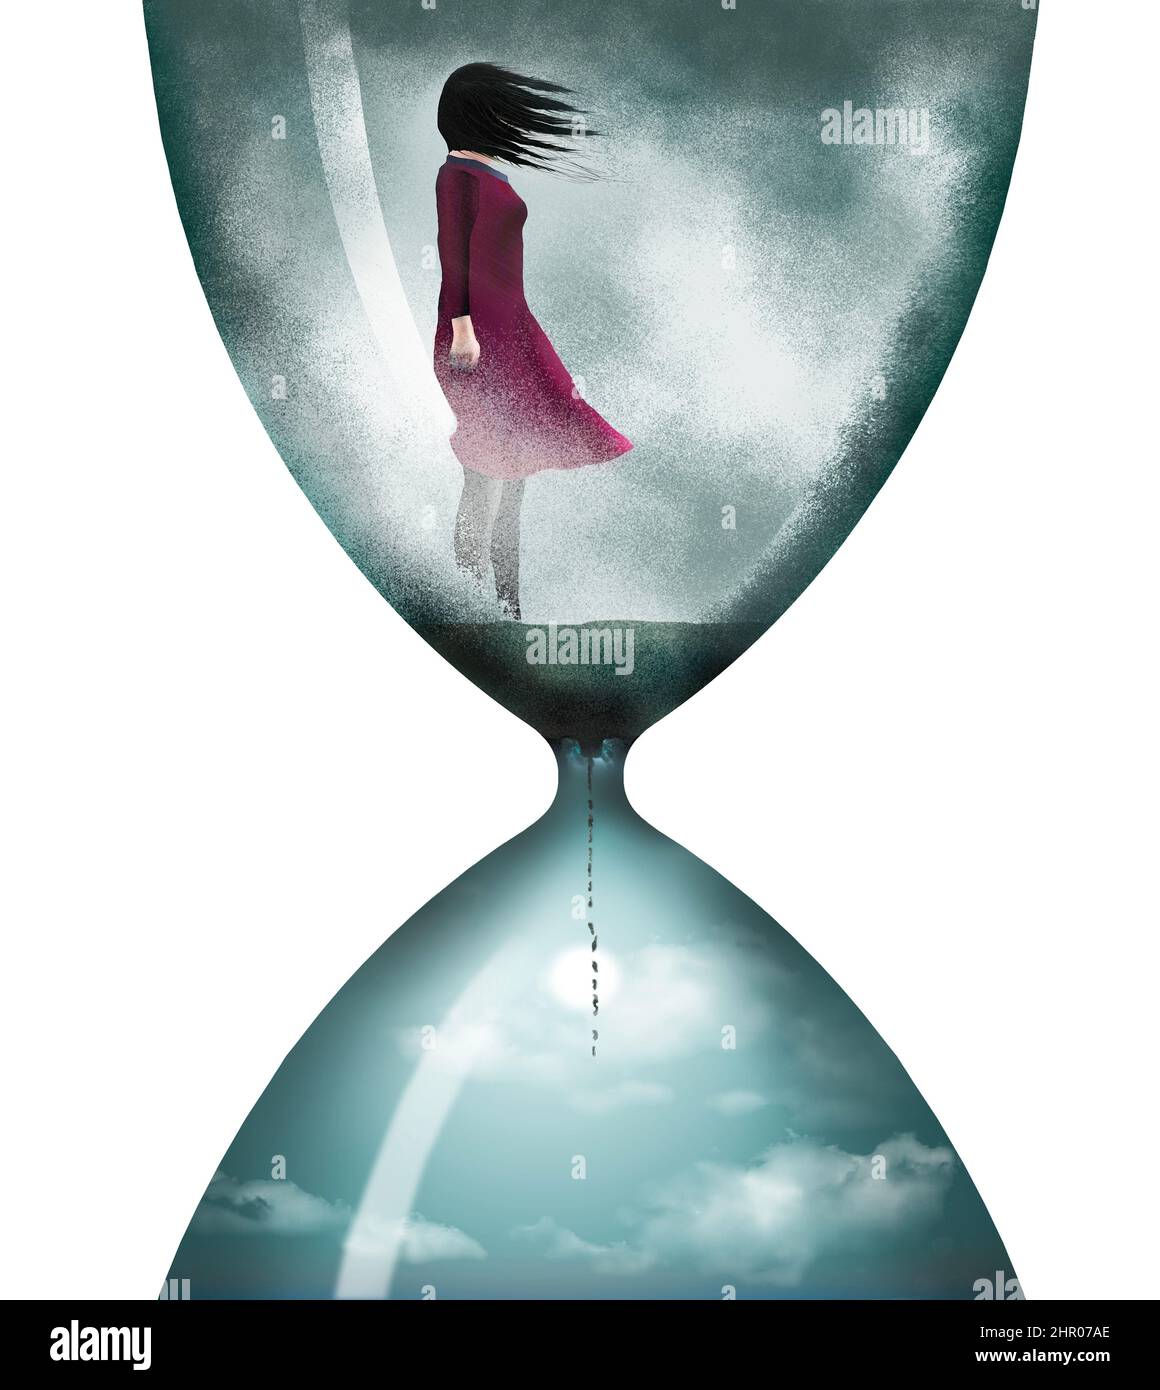 A girl in a red dress endures wind as she waits for time to pass inside an hourglass in a 3-d illustration. Stock Photo